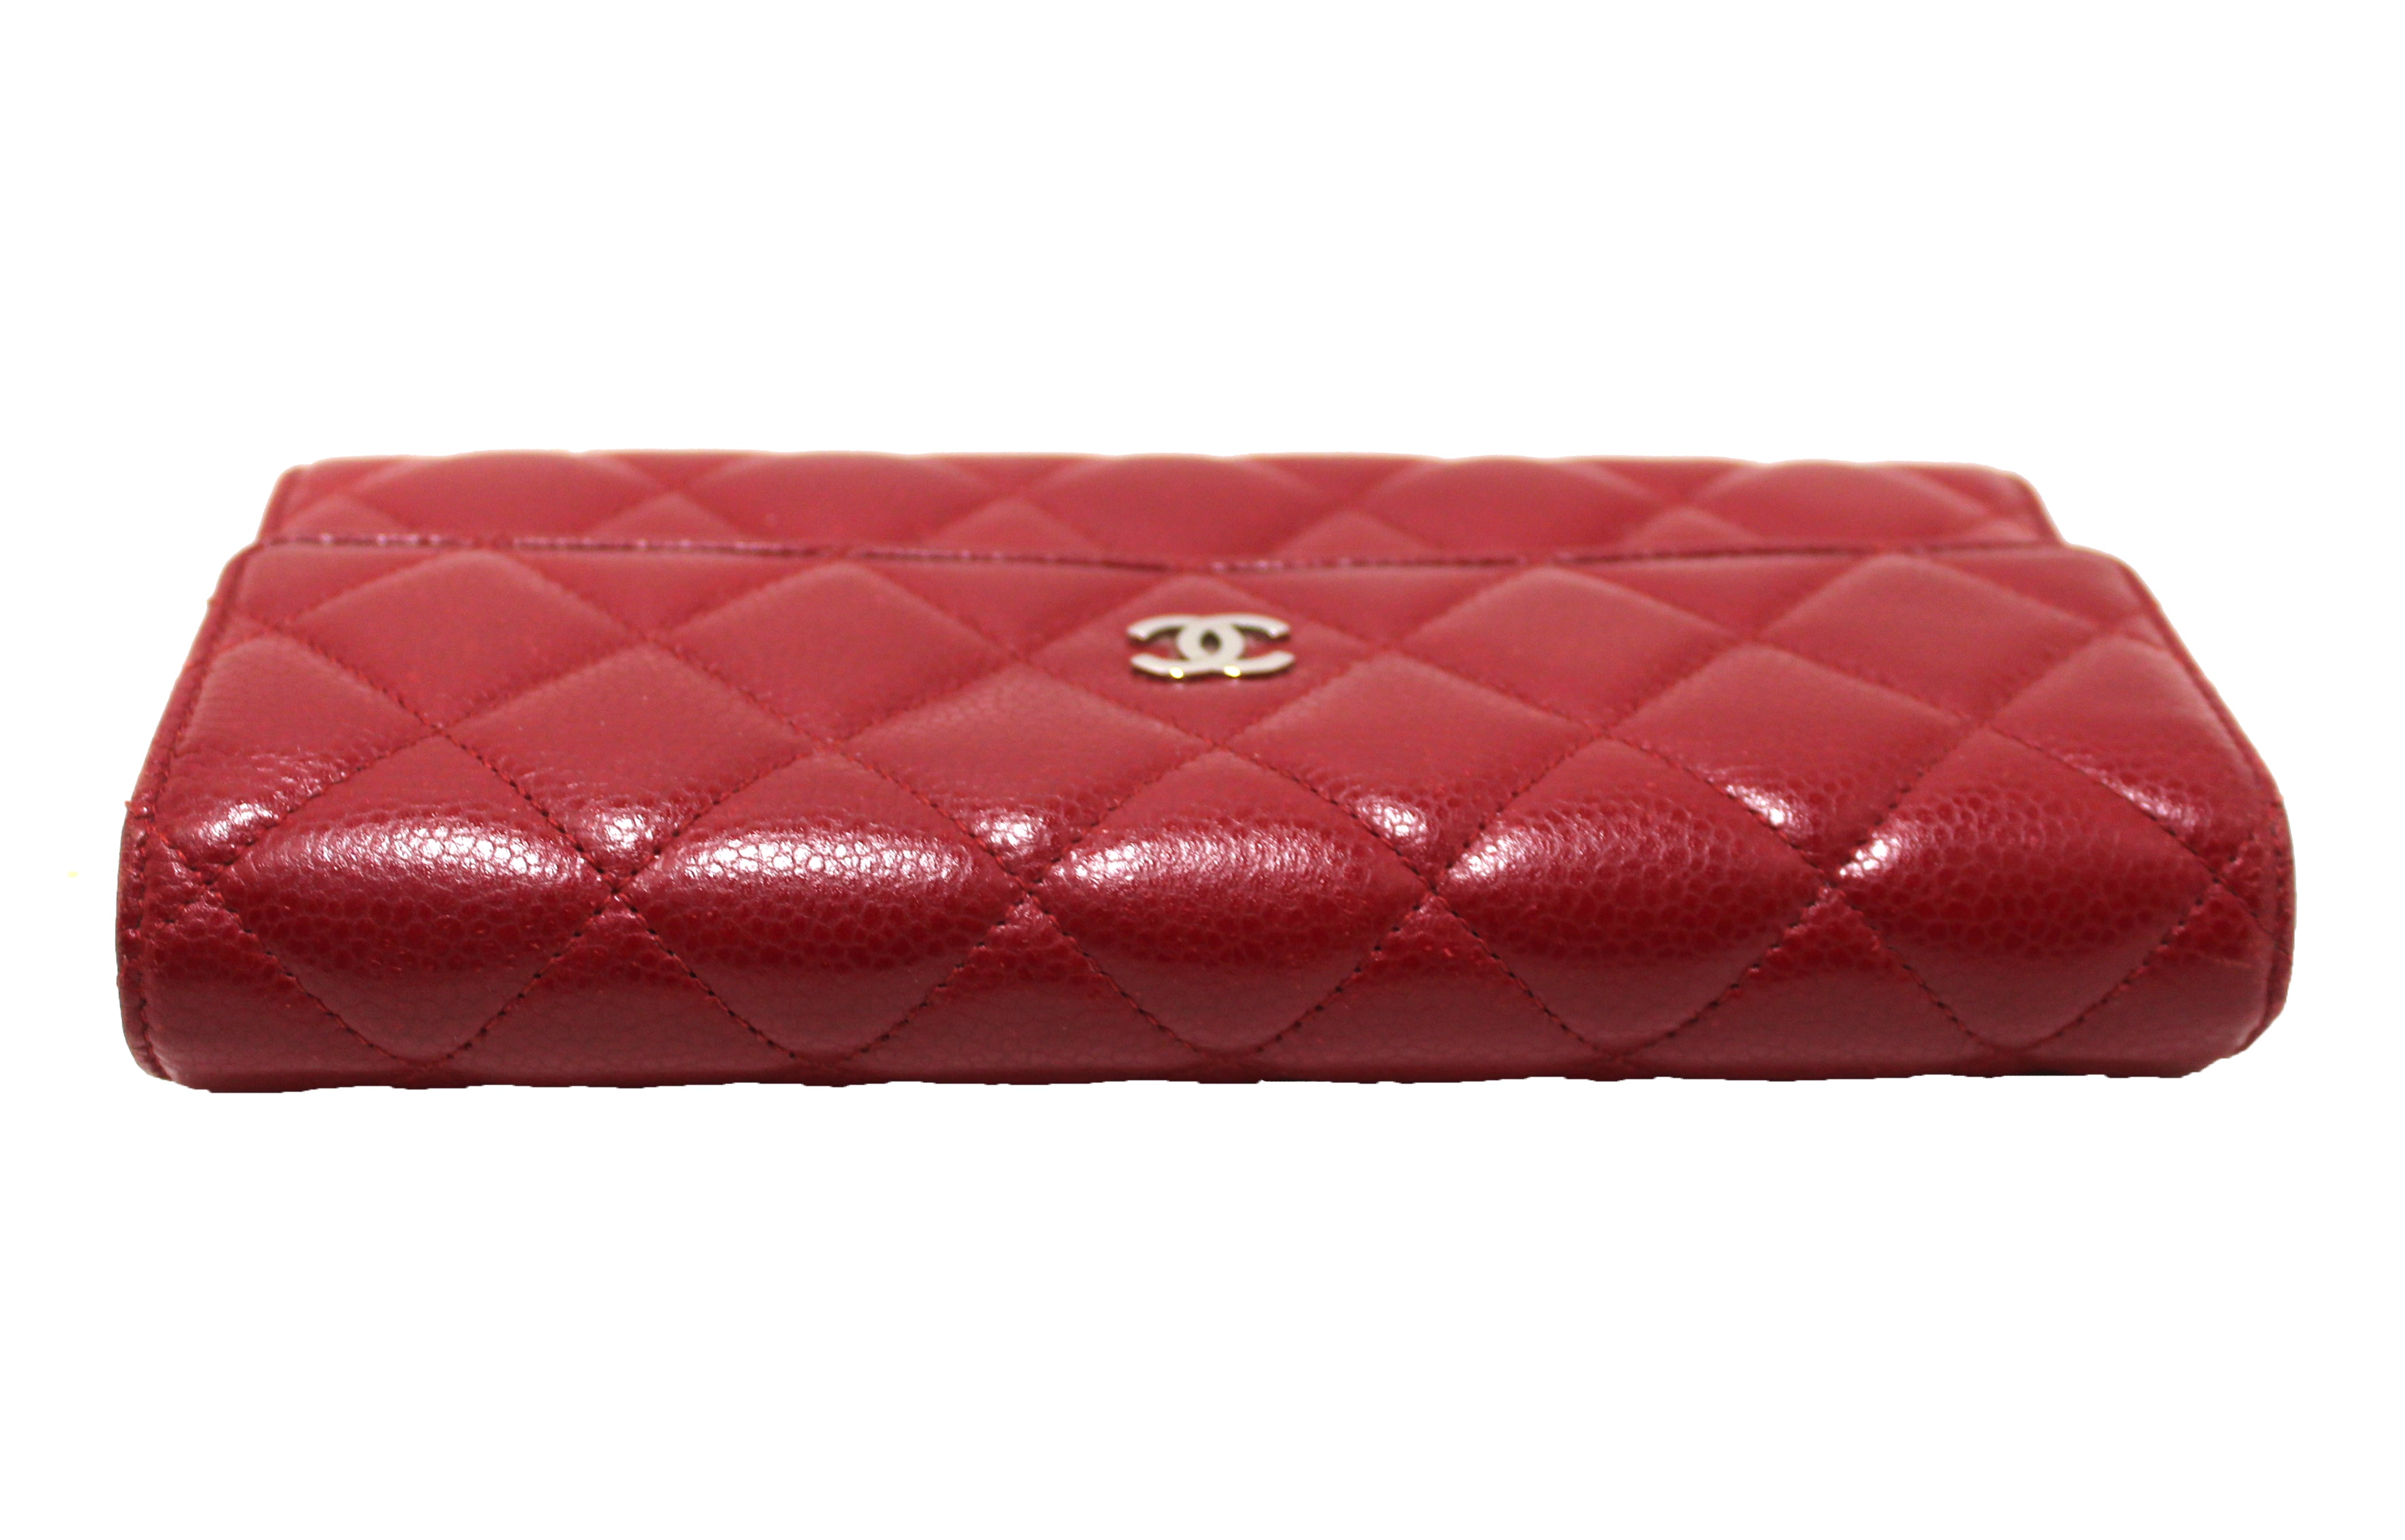 Authentic Chanel Red Caviar Leather Quilted Long Flap Wallet